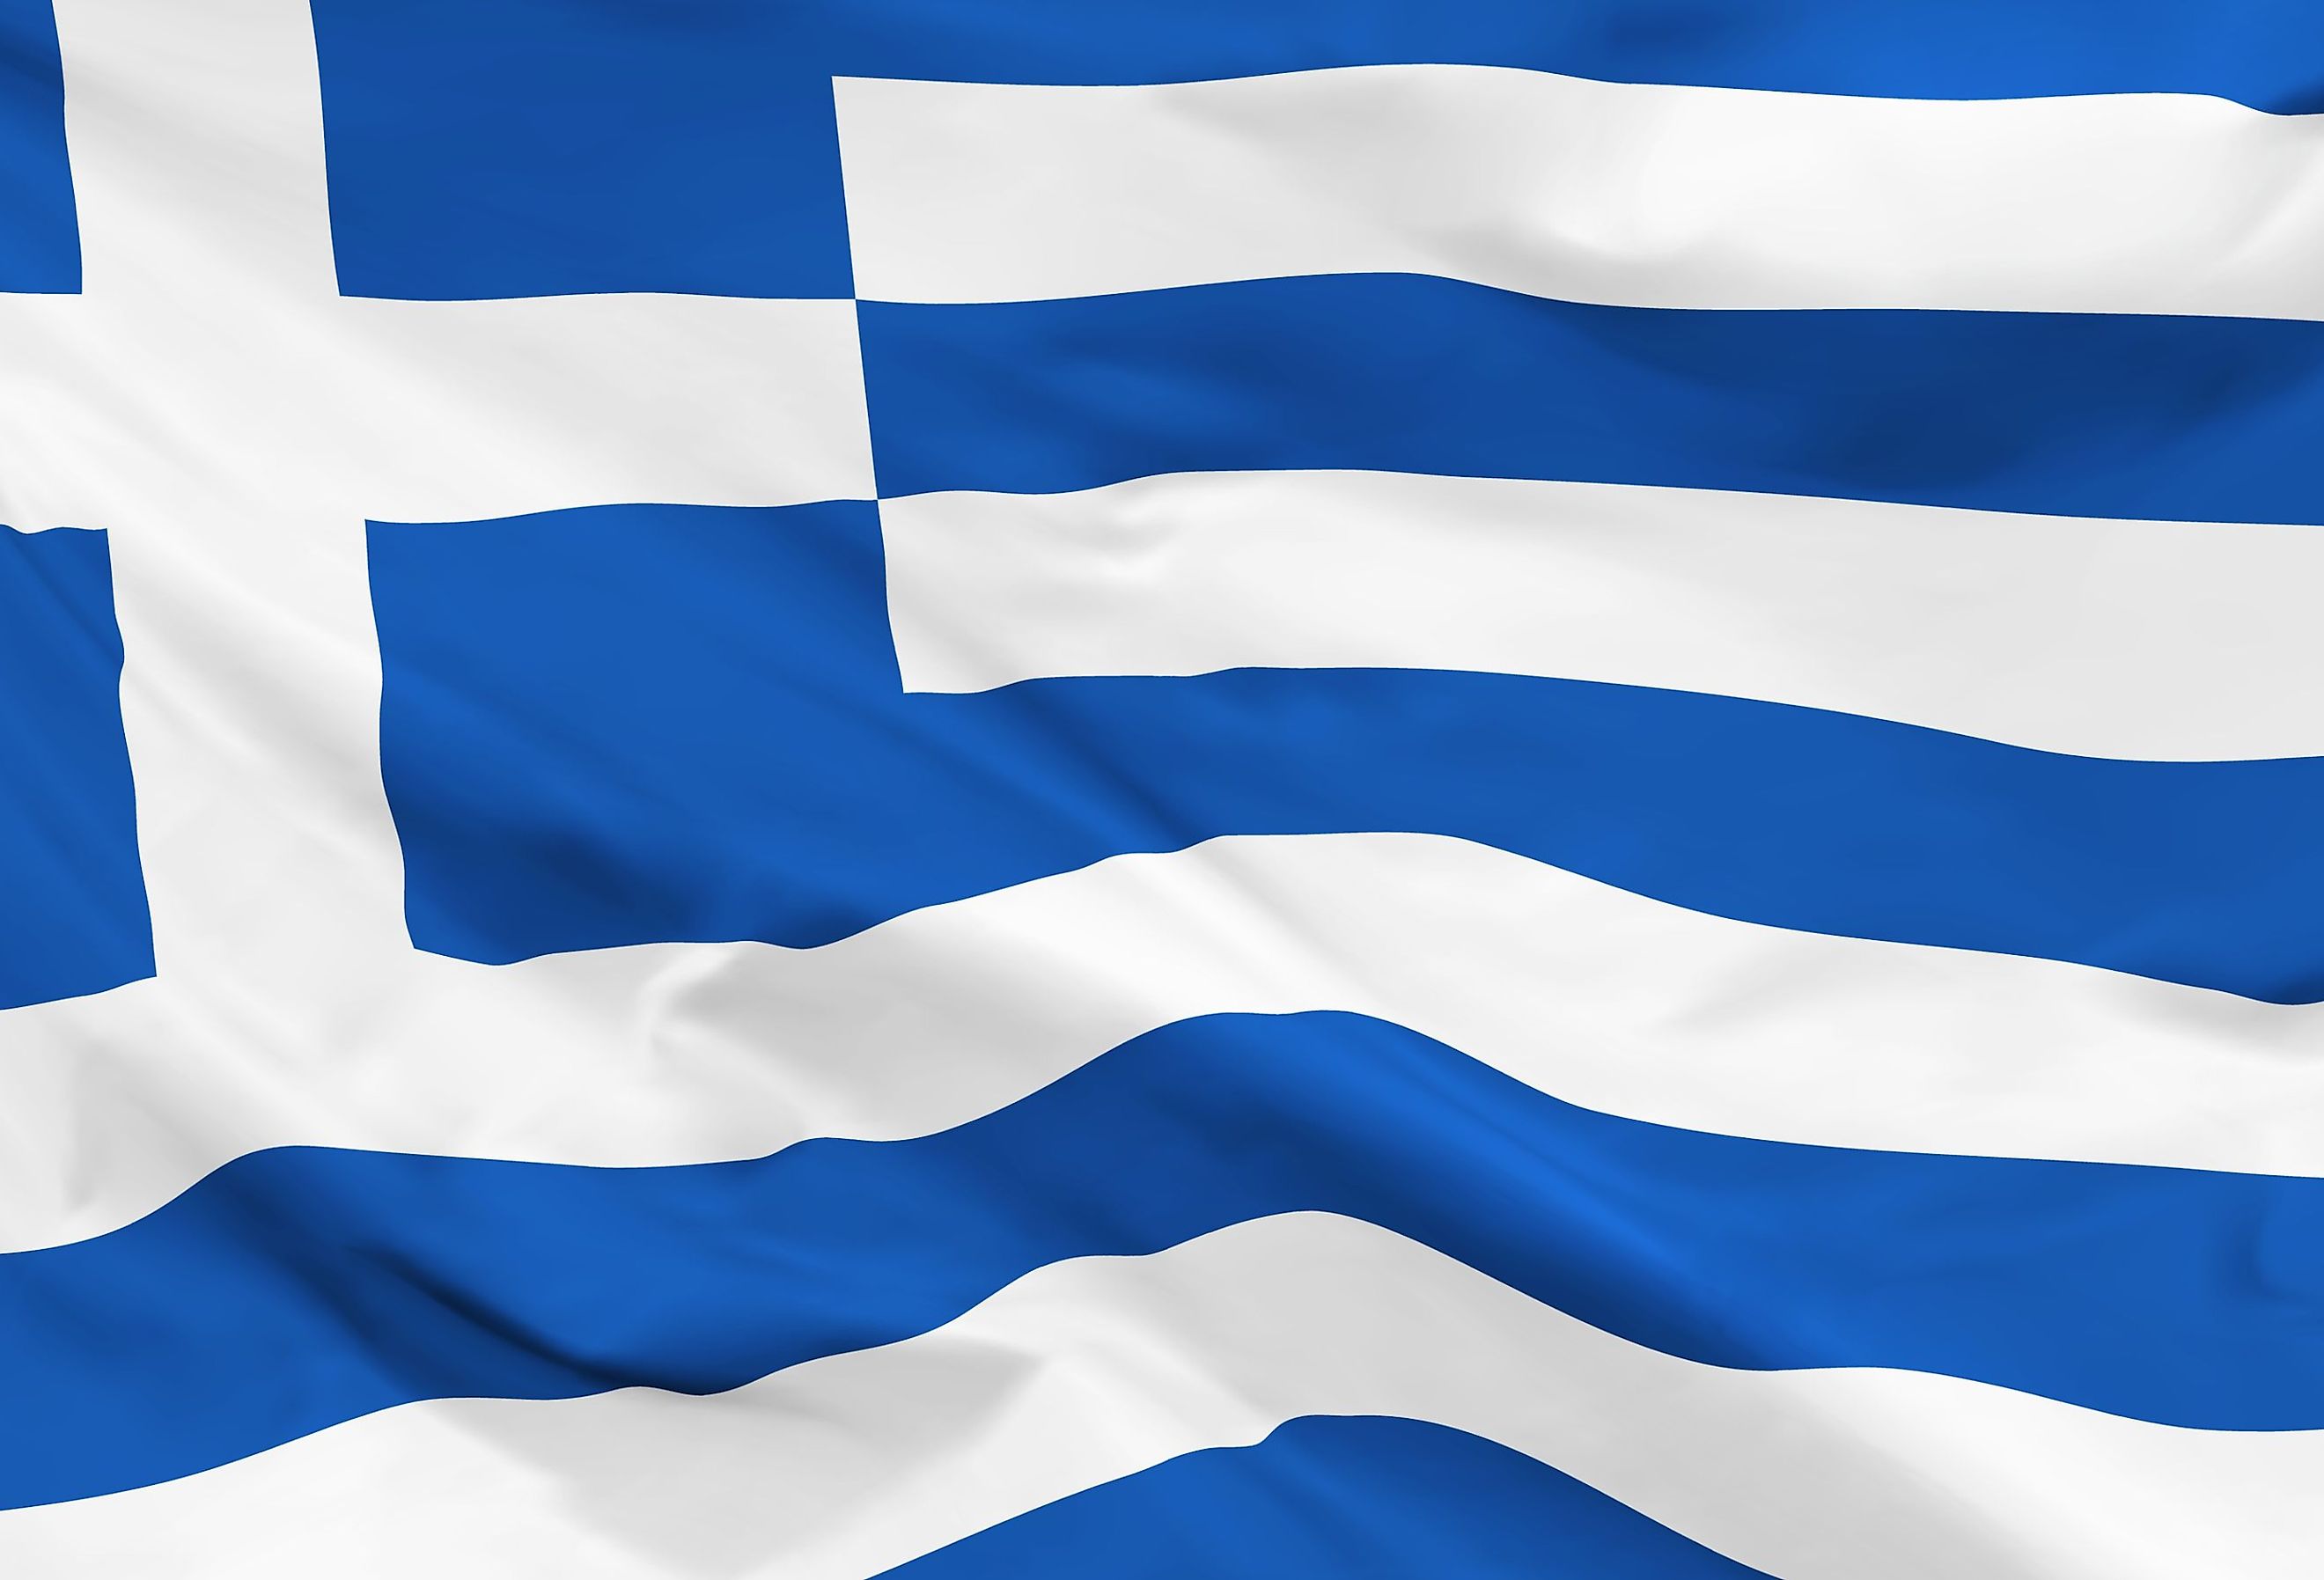 Greece is a country with a blue and white flag. Image credit rustamank via Shutterstock